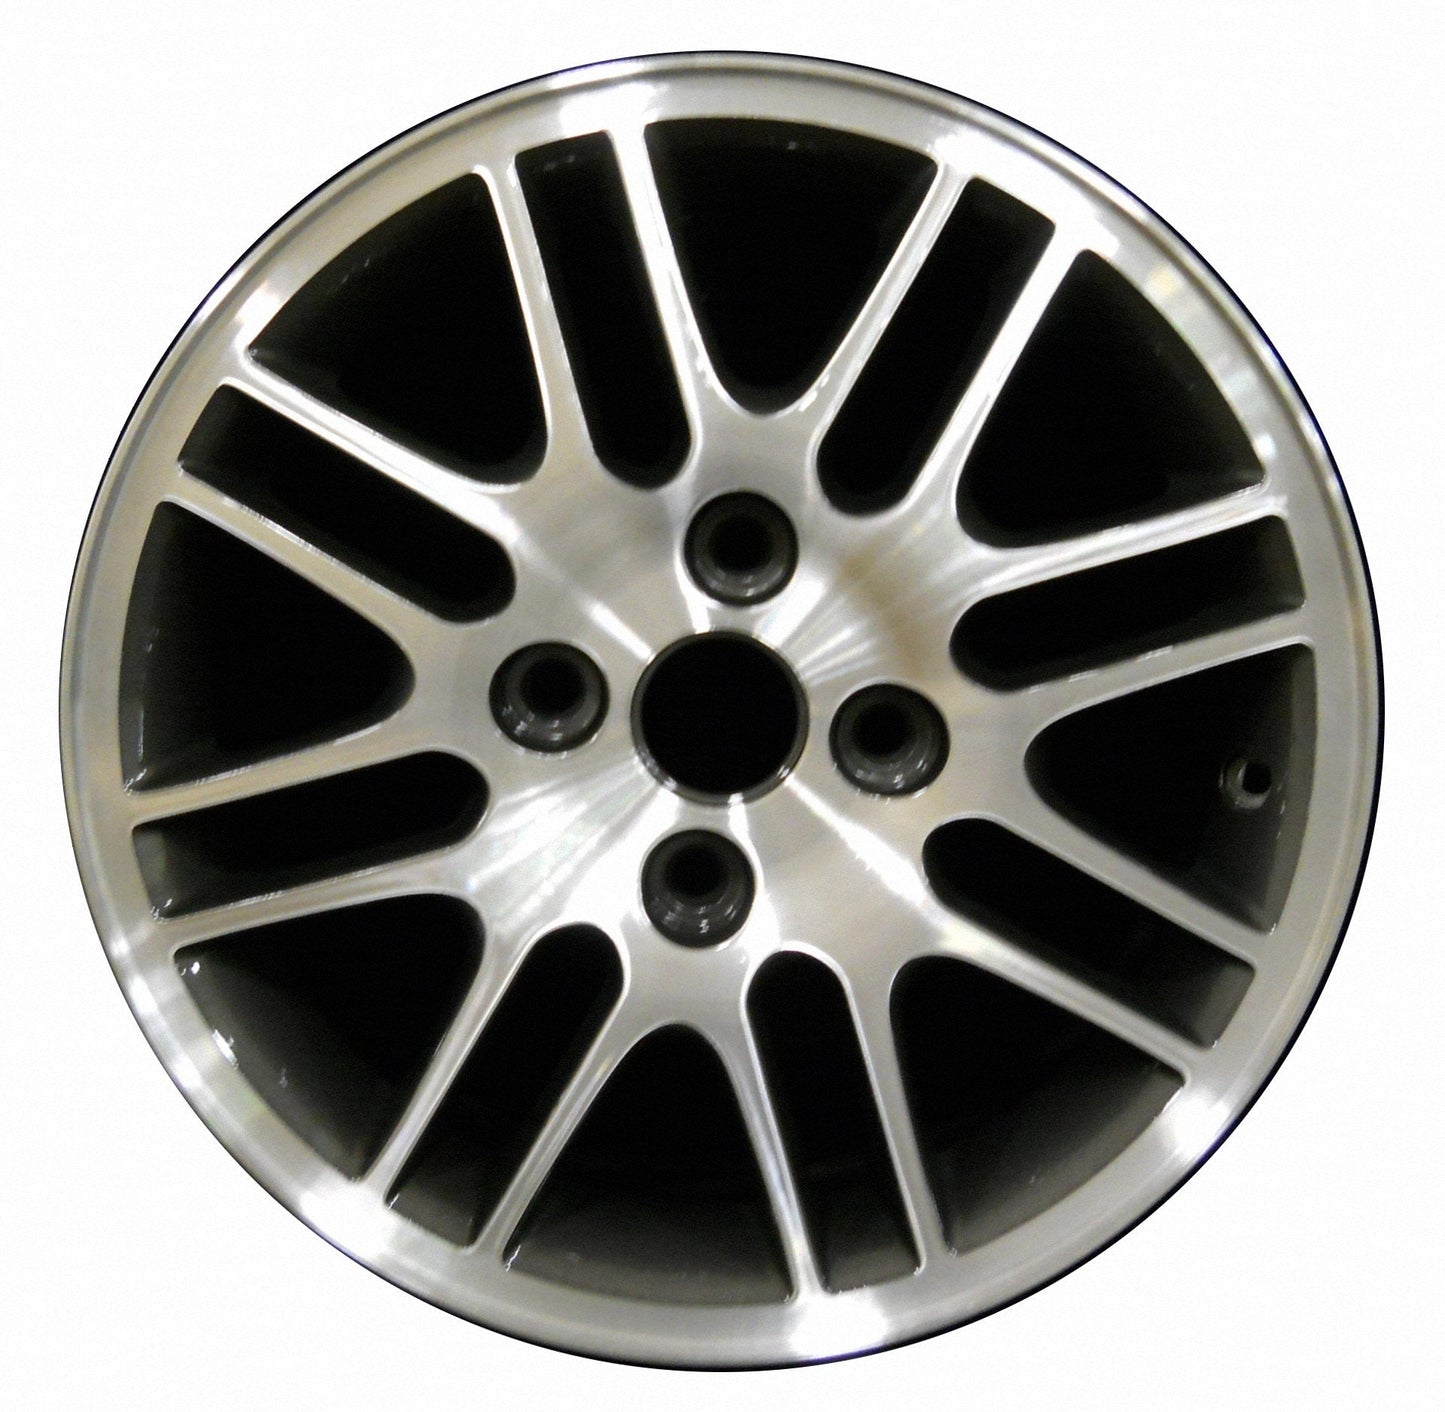 Ford Focus  2000, 2001, 2002, 2003, 2004, 2005, 2006, 2007, 2008, 2009, 2010, 2011 Factory OEM Car Wheel Size 15x6 Alloy WAO.3367B.PC04.MA